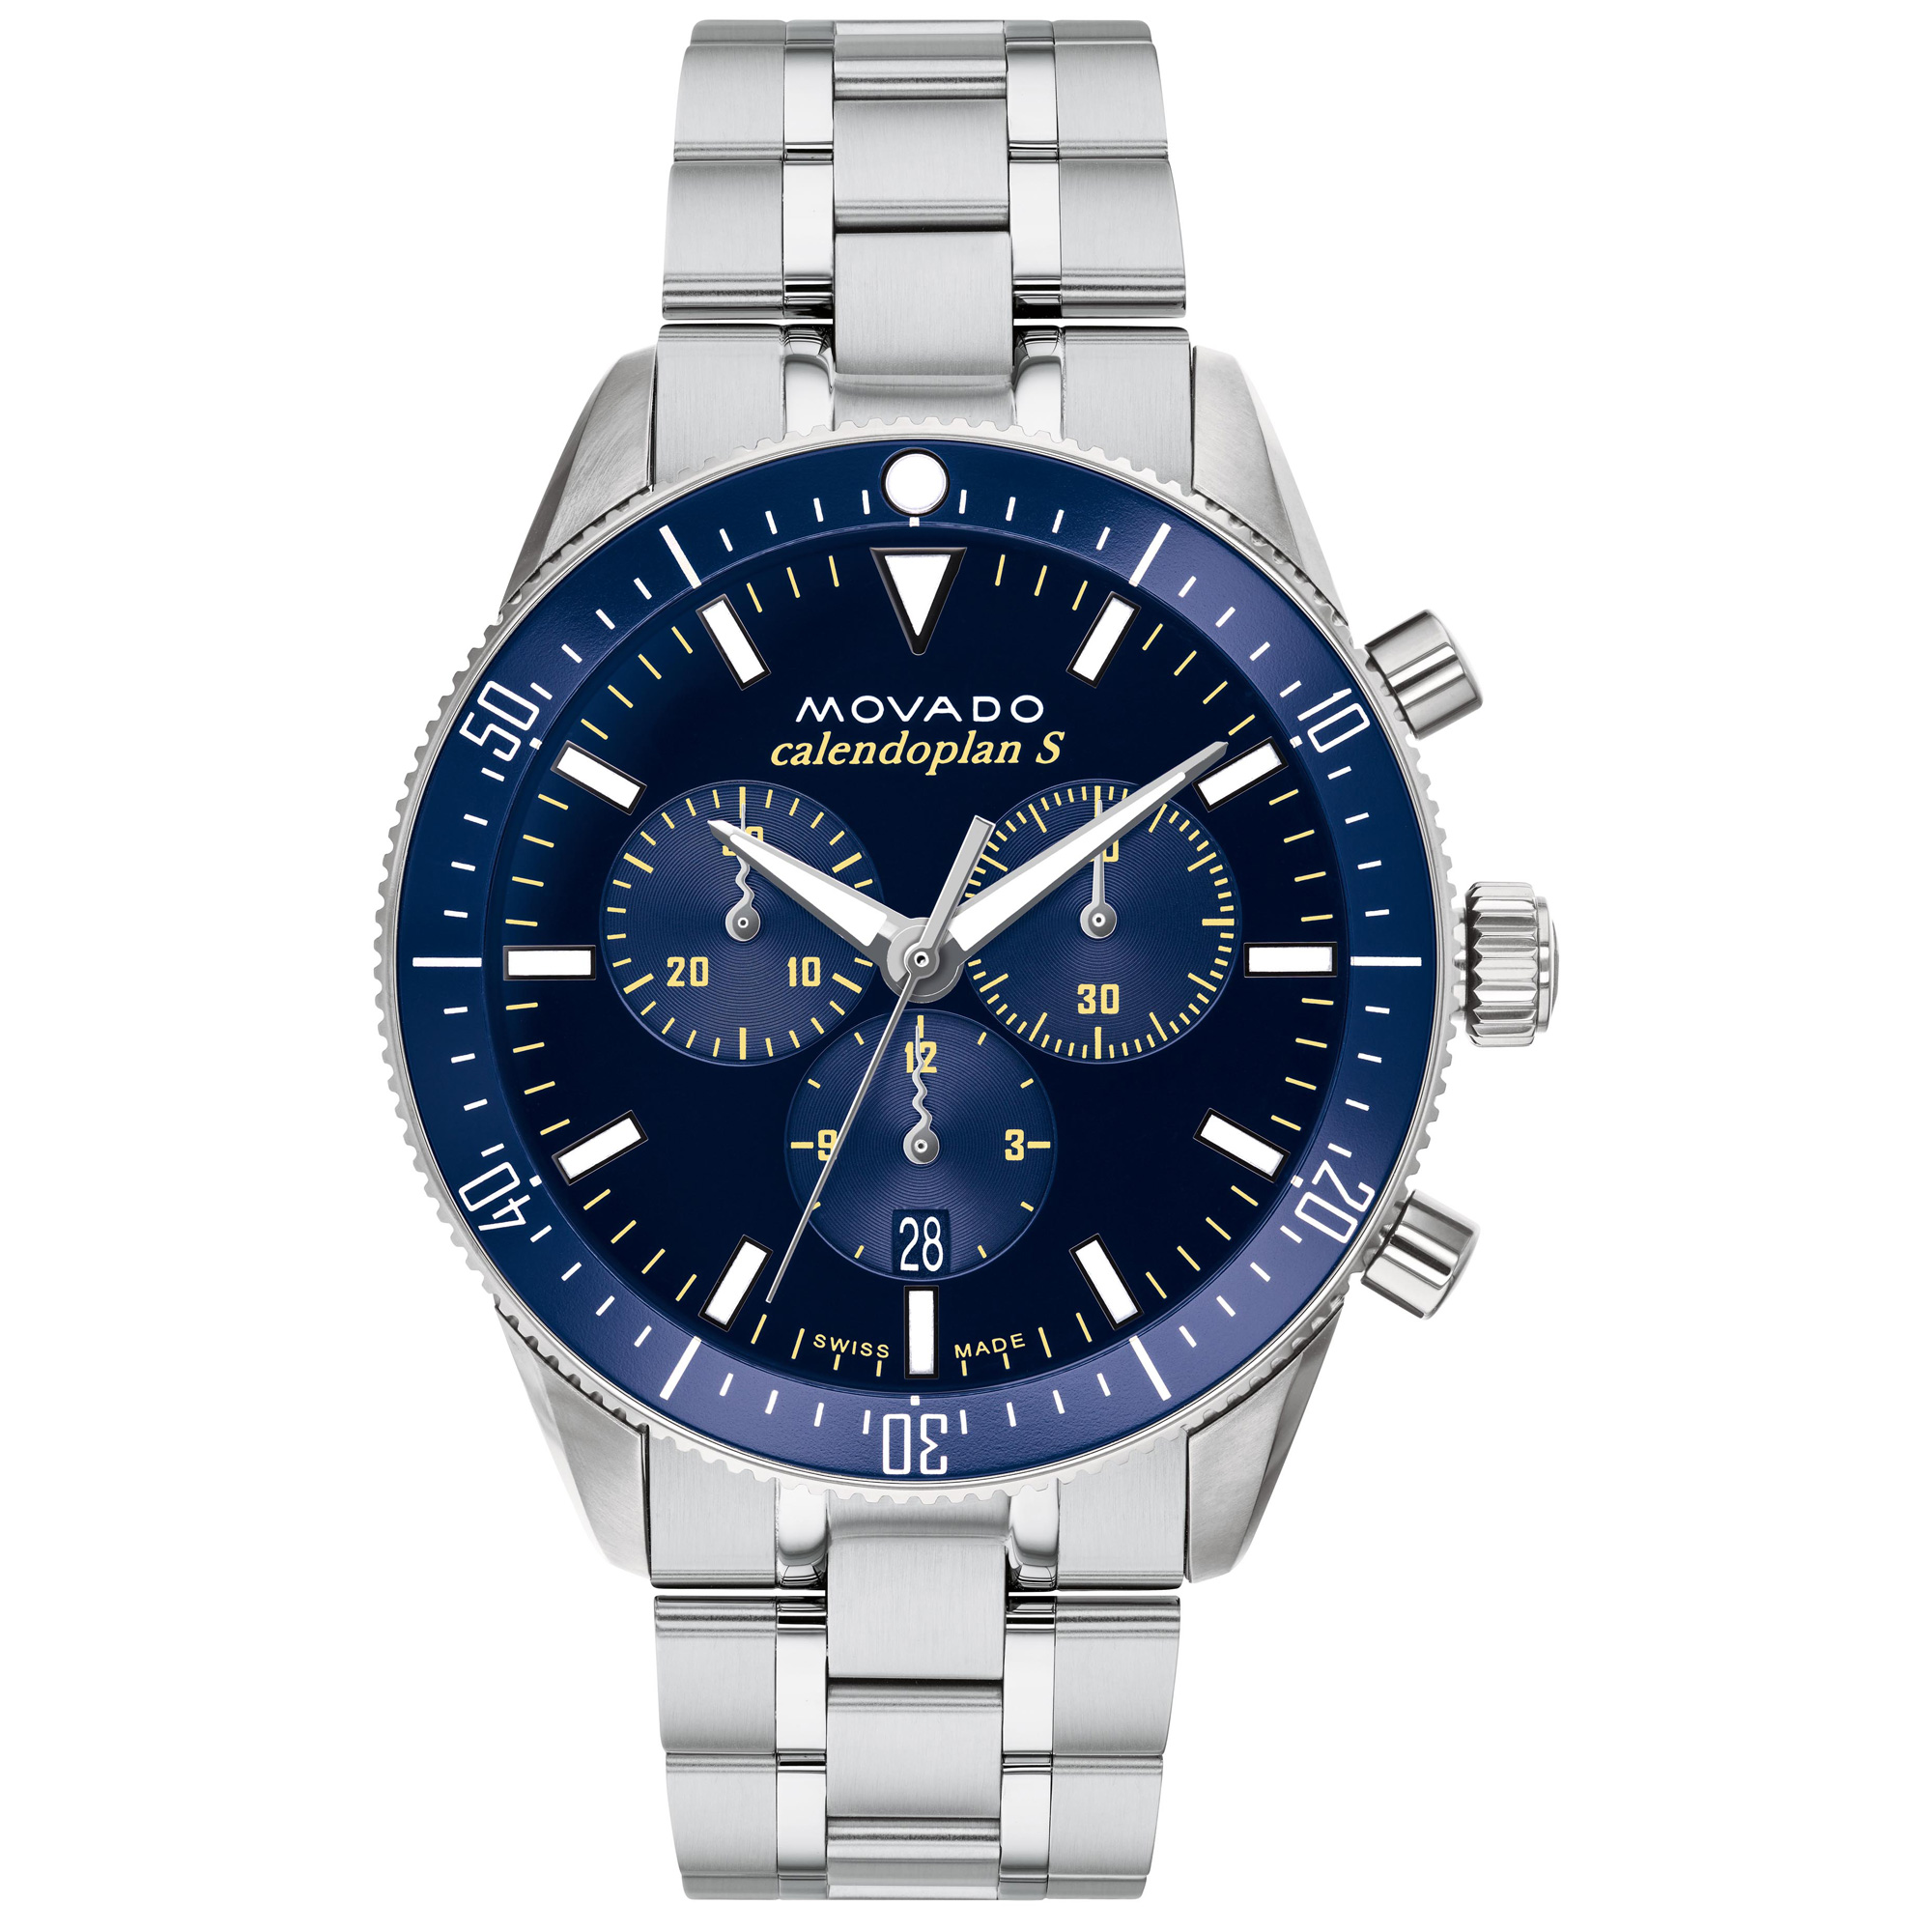 Movado Heritage Series Calendoplan S Chronograph Blue Dial and Stainless Steel Bracelet Watch | 42mm | 3650124